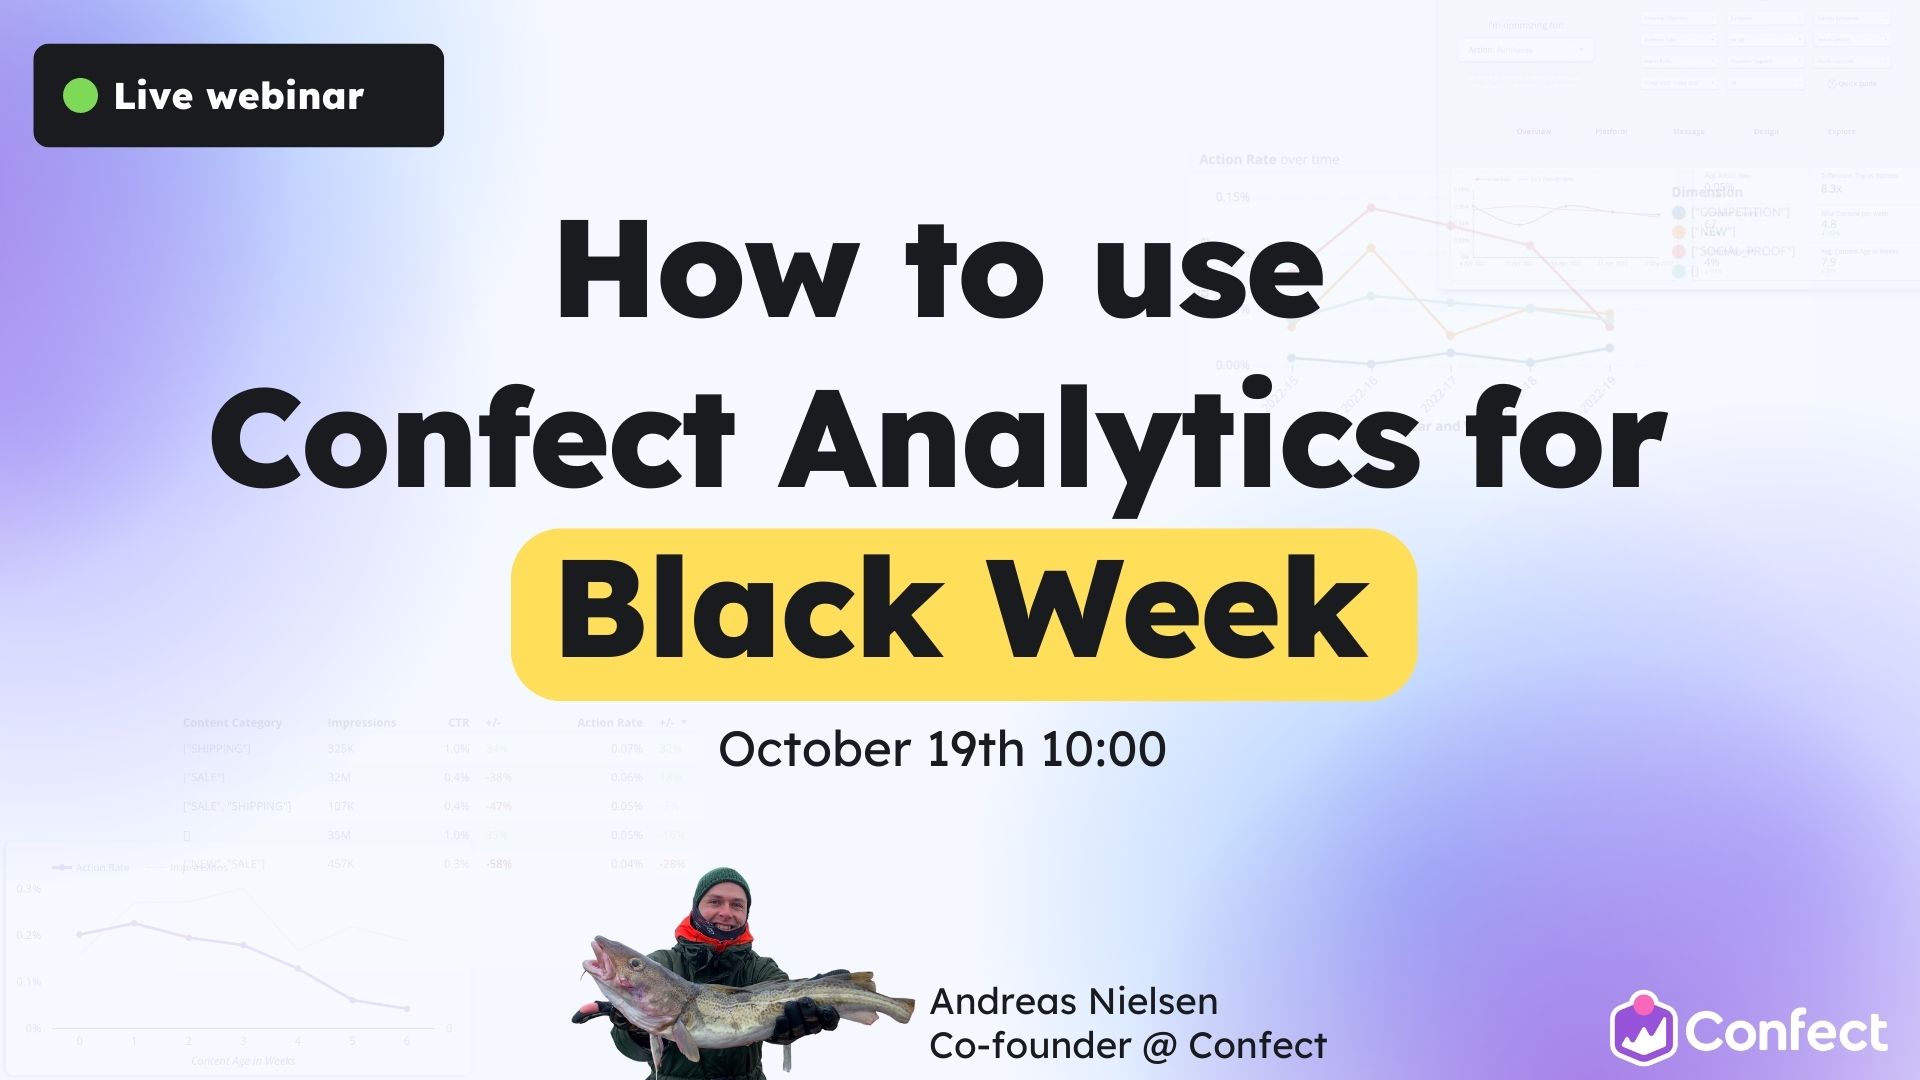 Confect analytics for Black Friday 